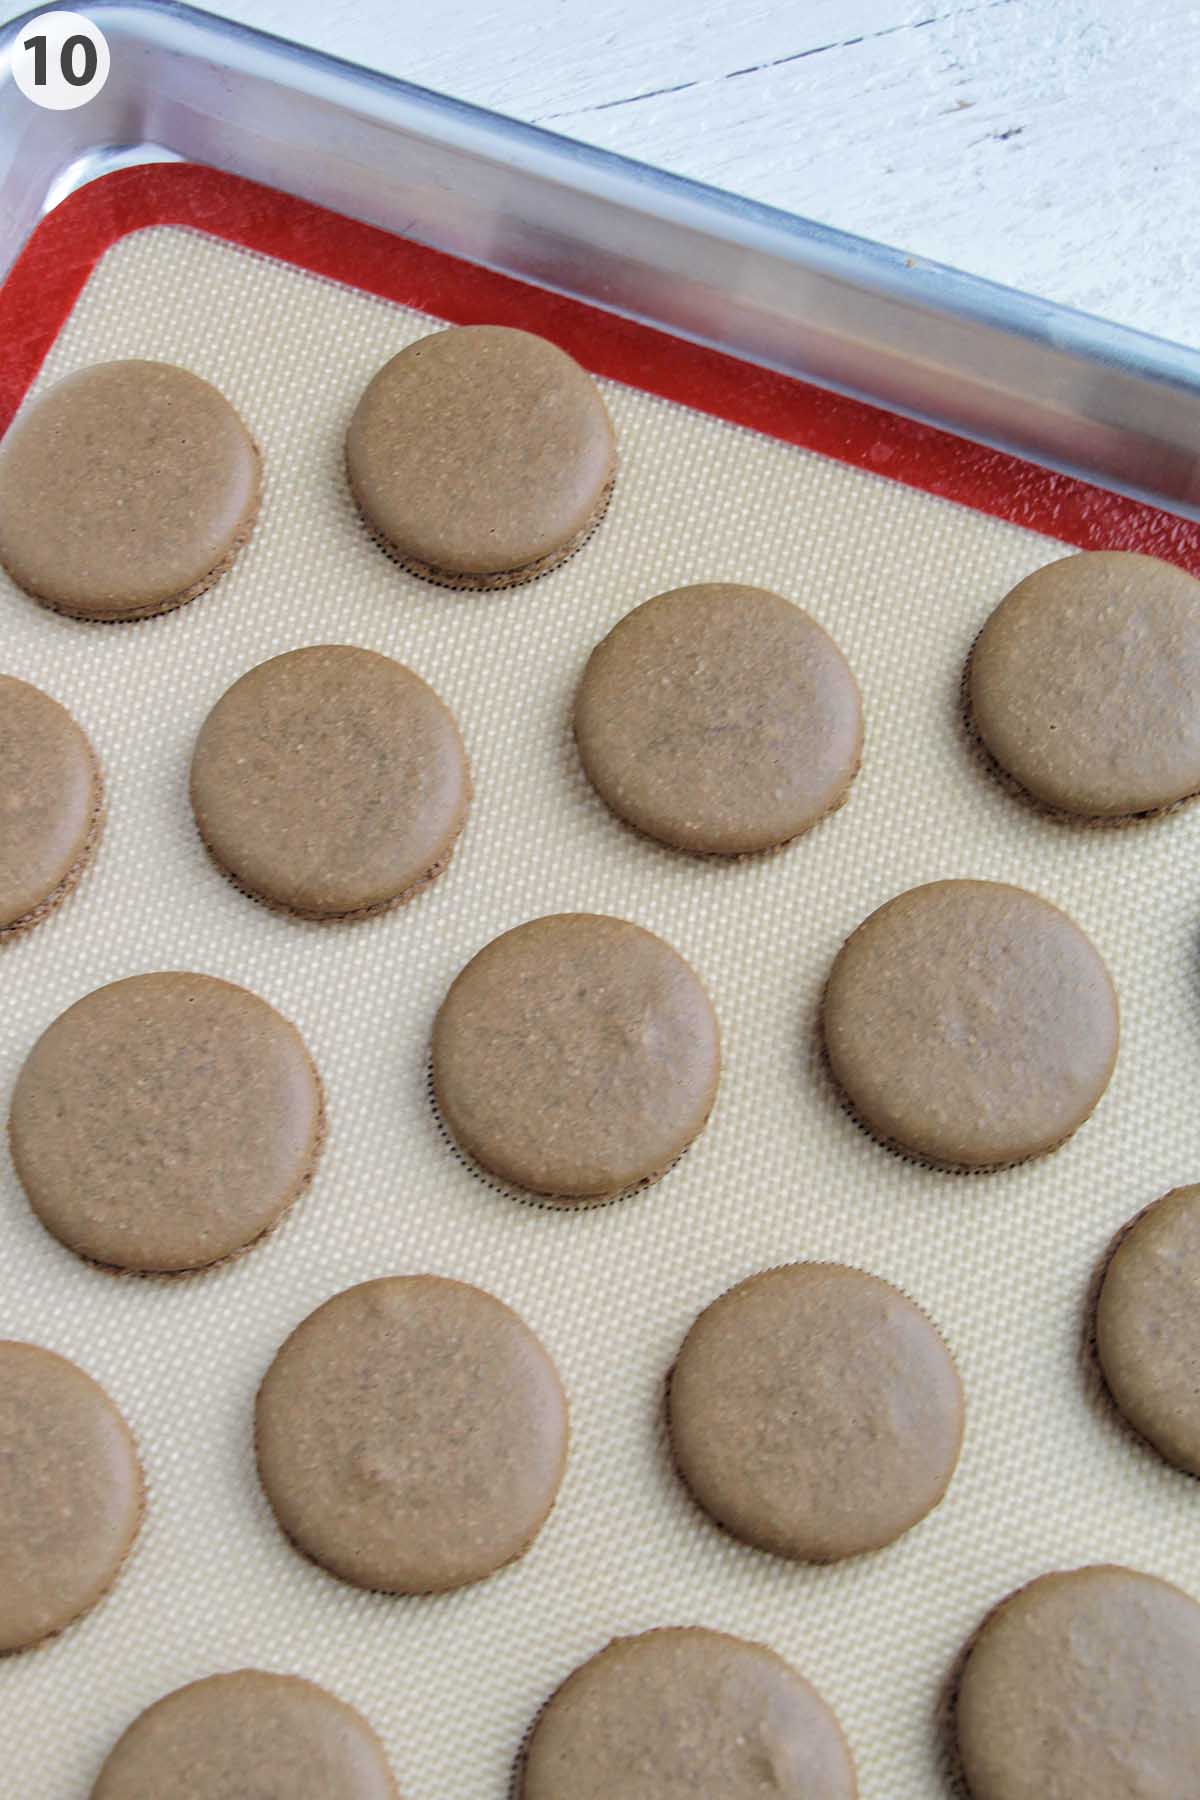 numbered photo showing baked macarons.